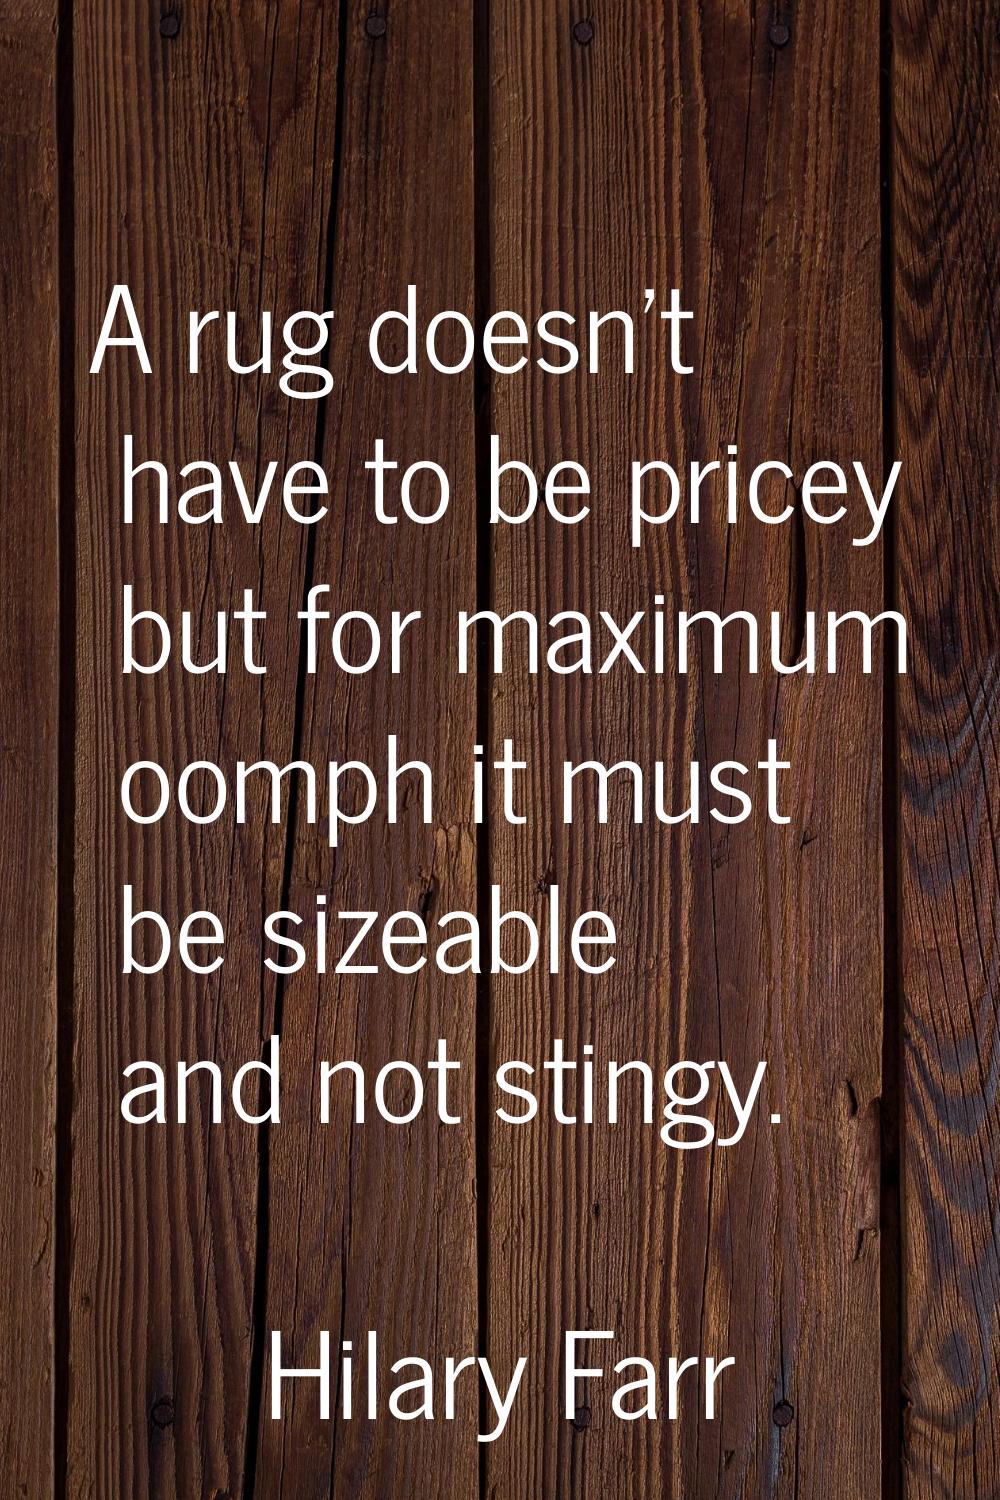 A rug doesn't have to be pricey but for maximum oomph it must be sizeable and not stingy.